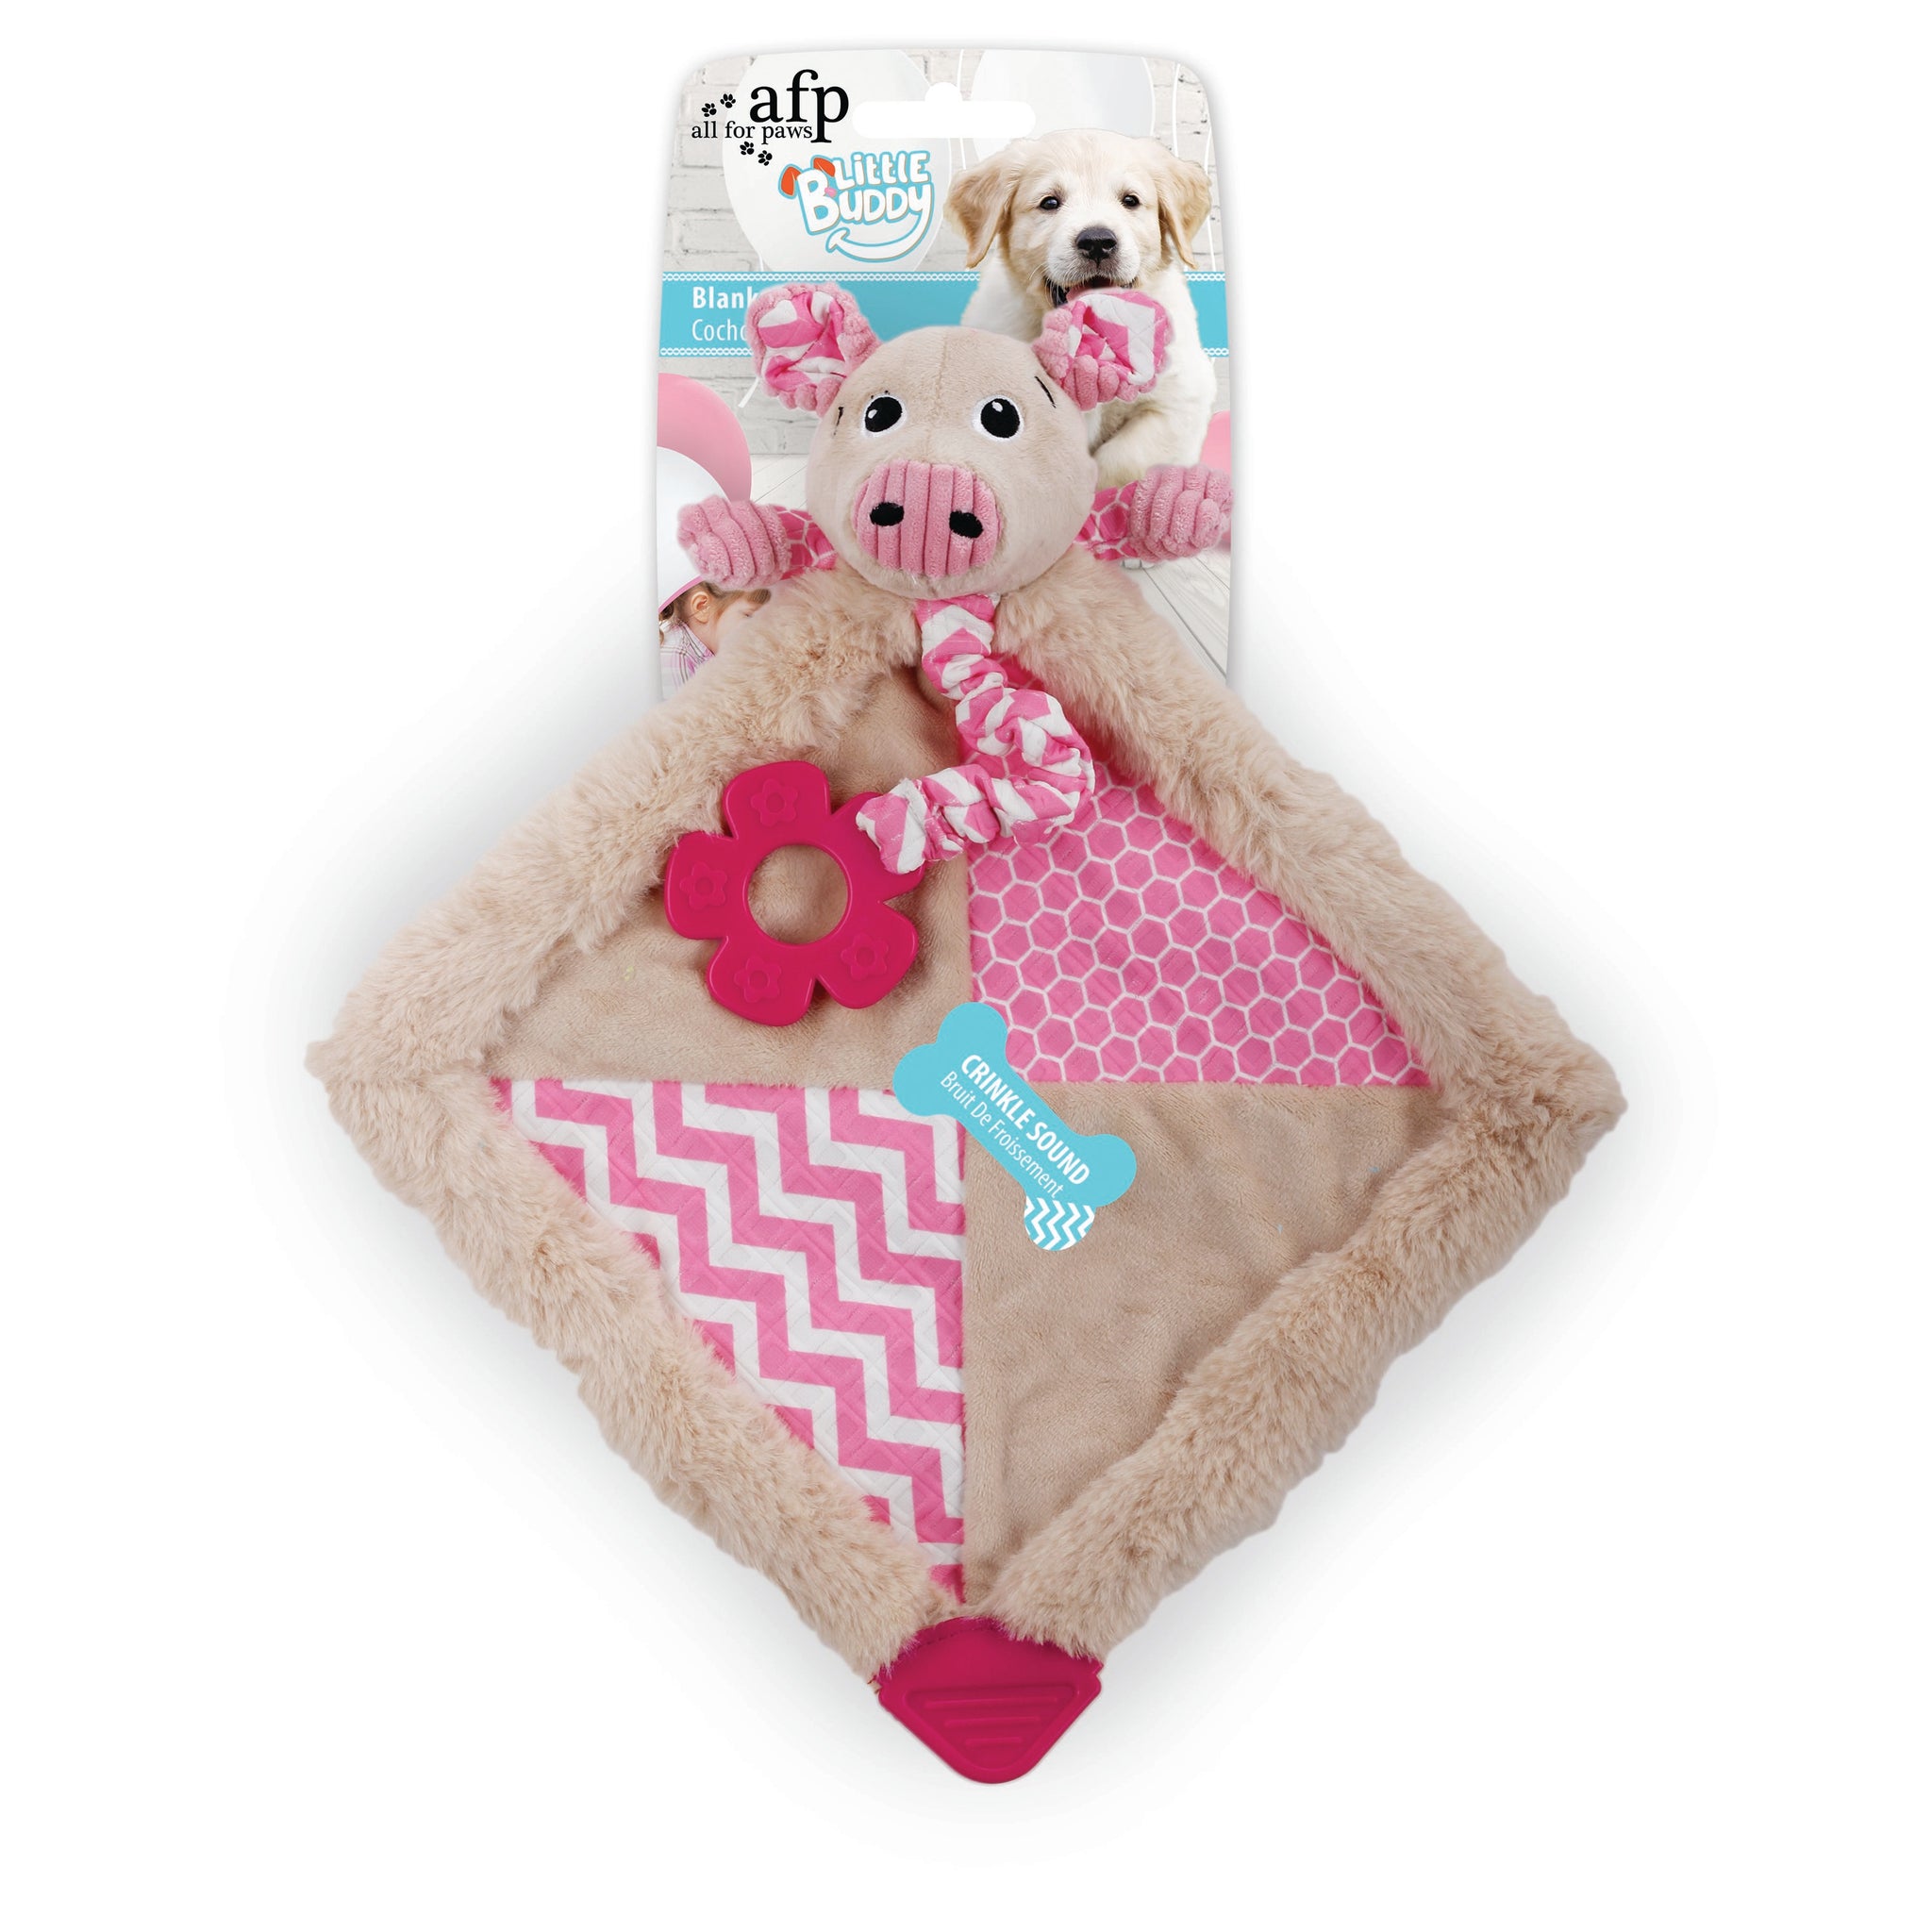 All For Paws Little Puppy Buddy Blanky Elephant - Fernie's Choice Classic Country Wear for Dogs